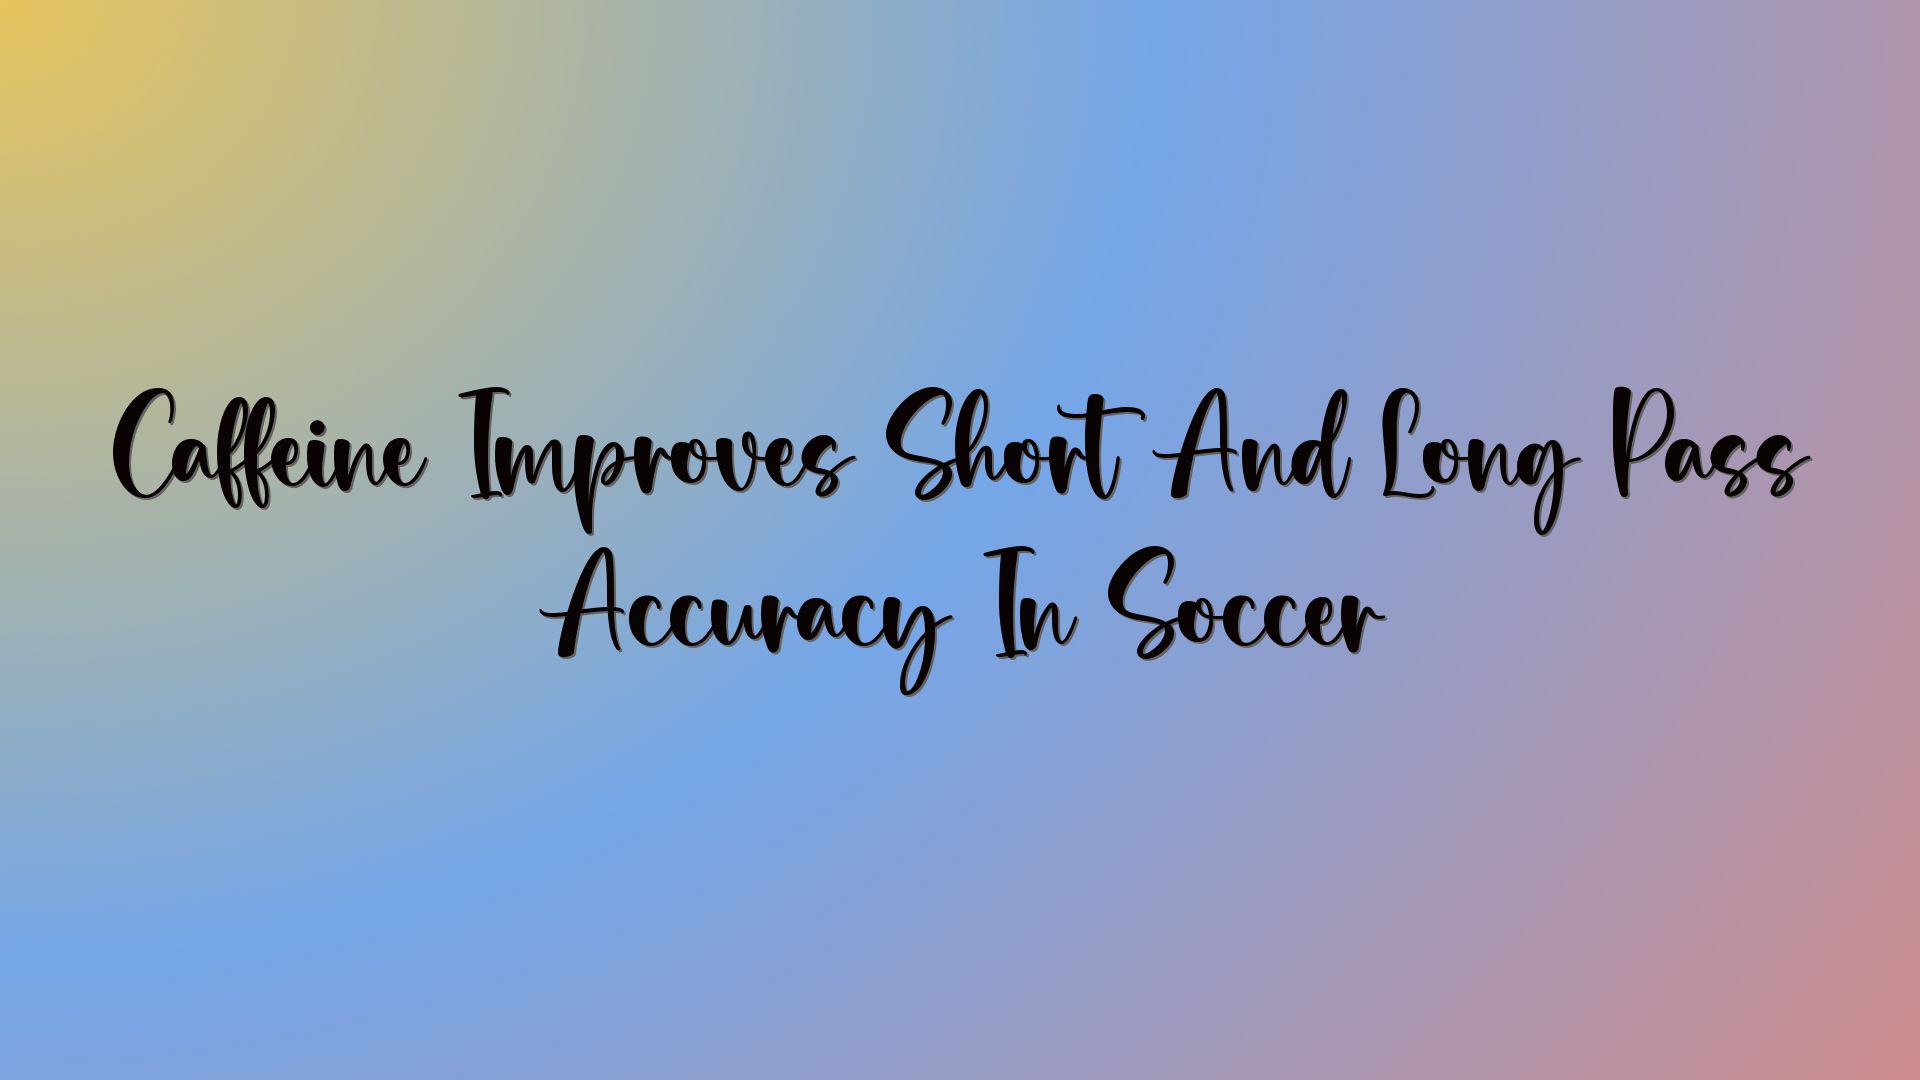 Caffeine Improves Short And Long Pass Accuracy In Soccer